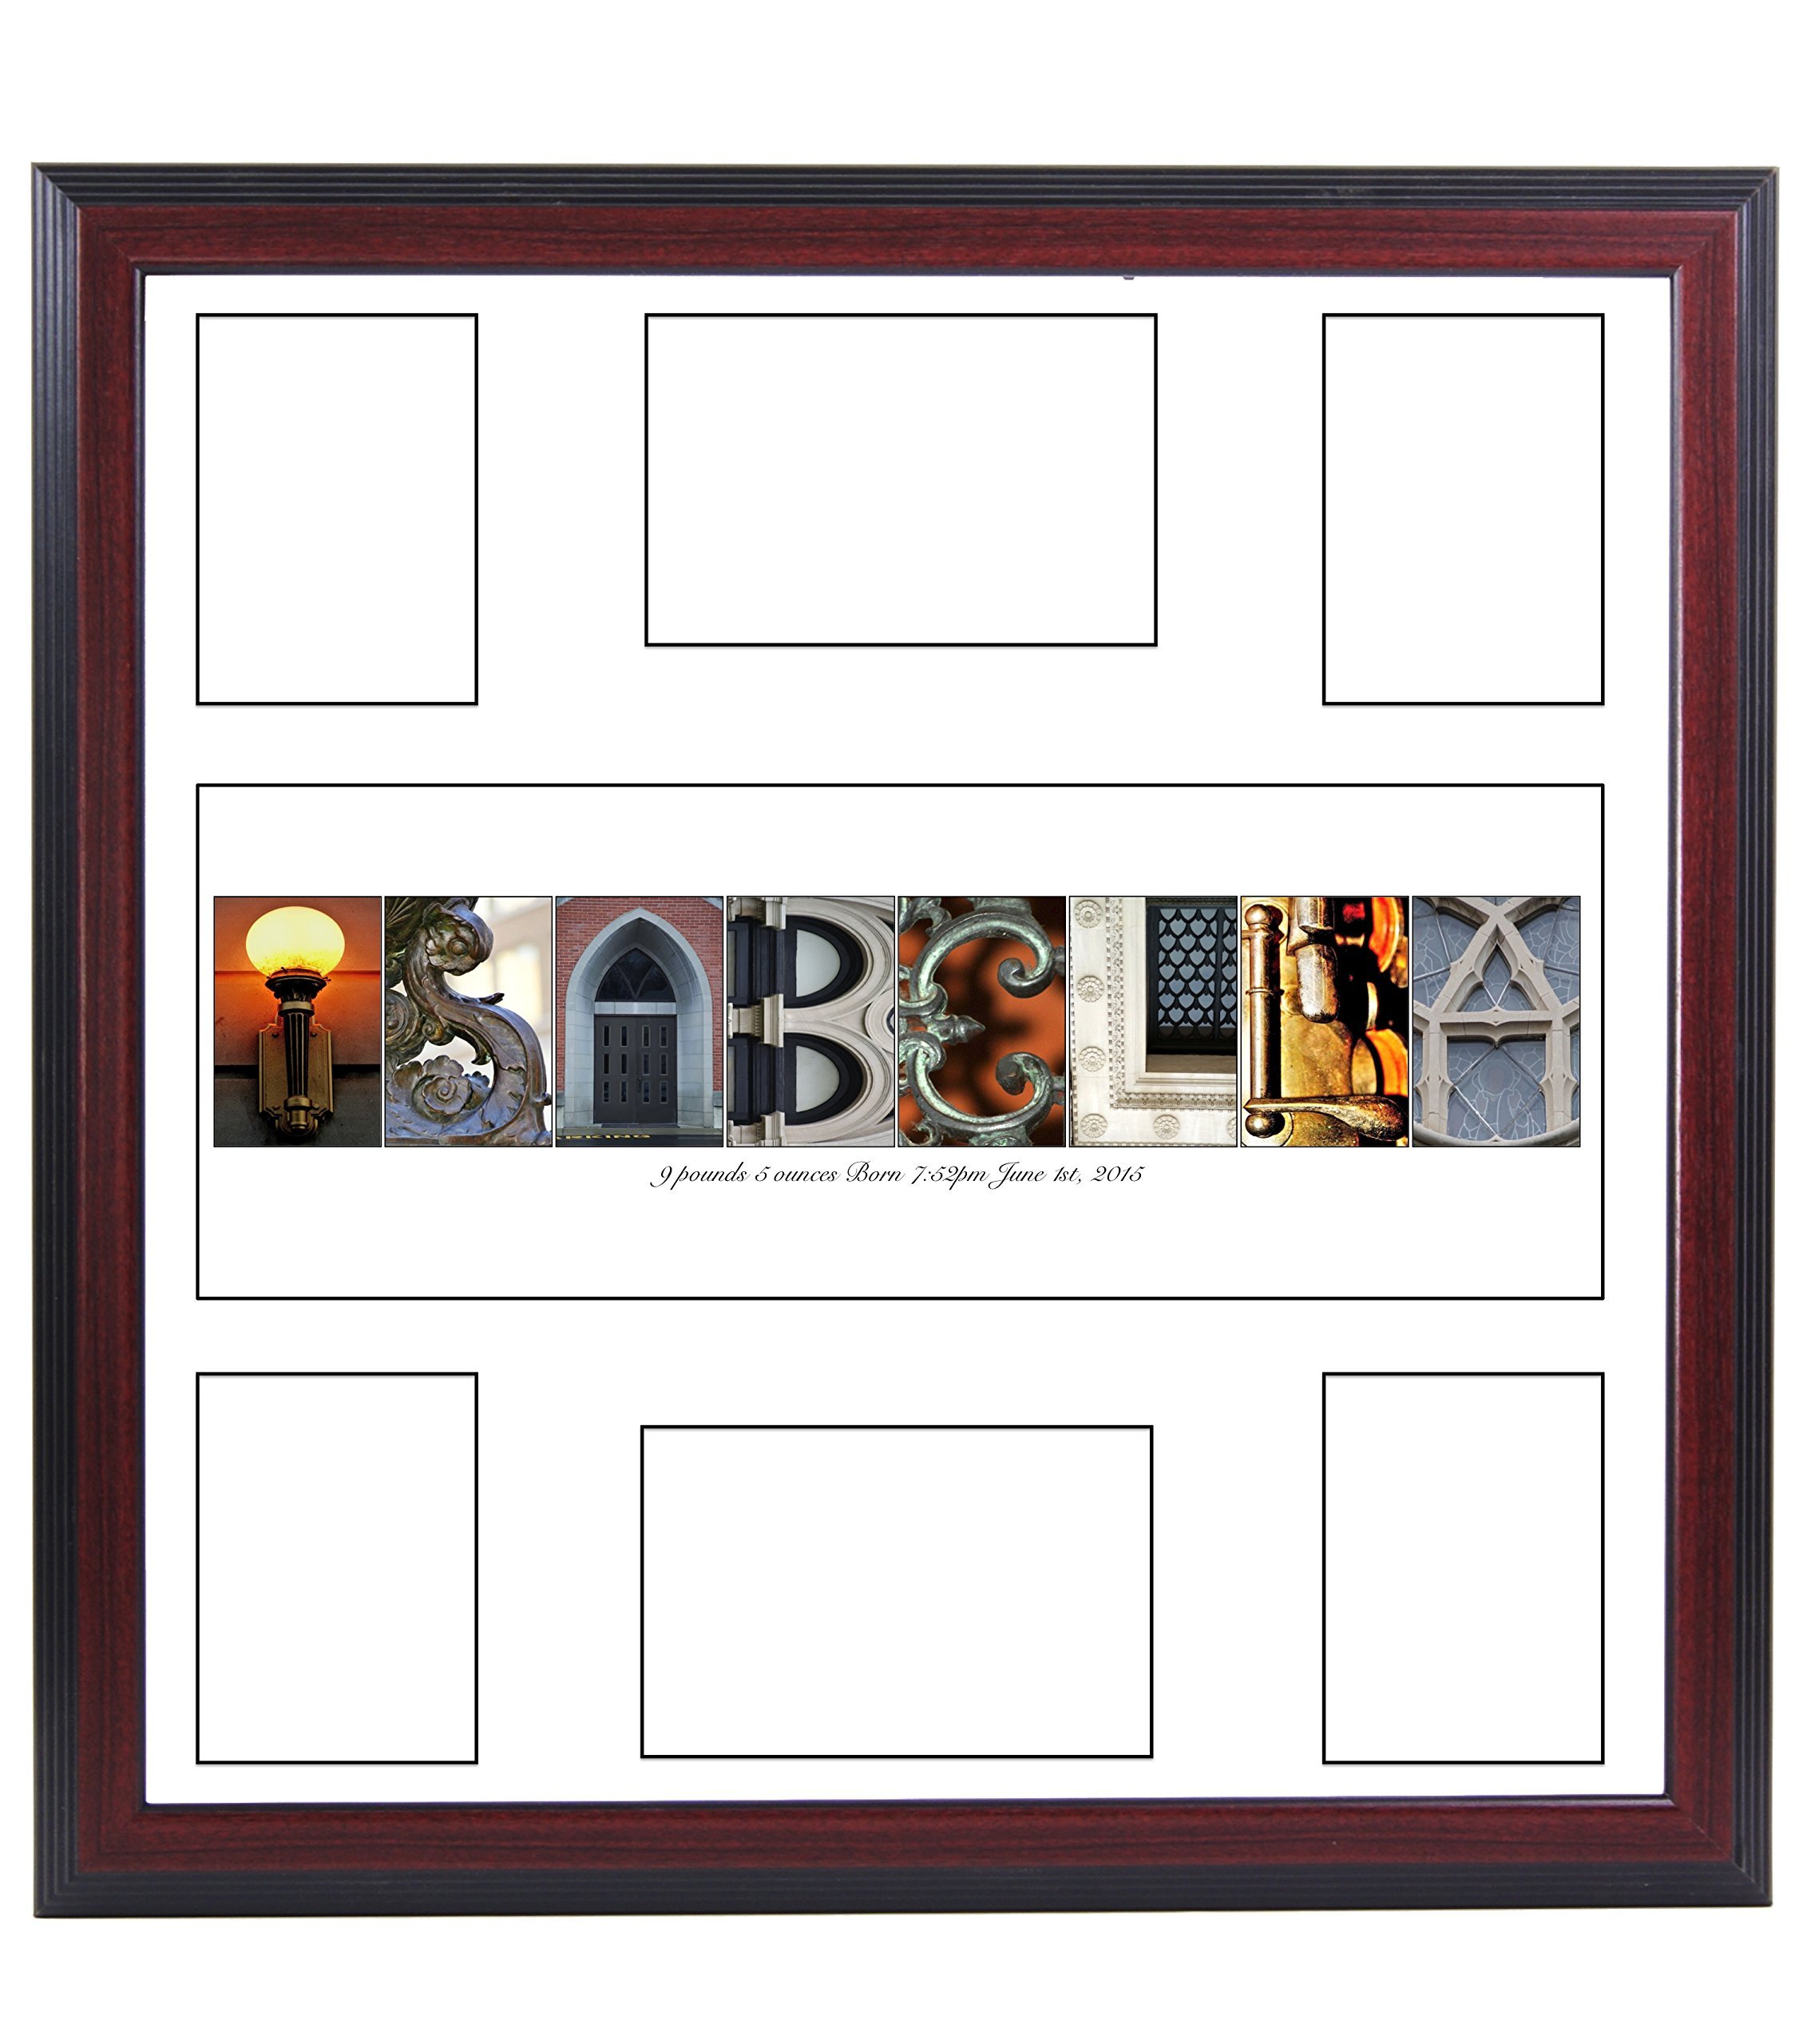 Creative Letter Art Personalized Children?s Guest Registry with 6 Opening Name Collage, 20 by 20 inch Frame Included for Newborn, Christening?s Bar Mitzvah & Graduations